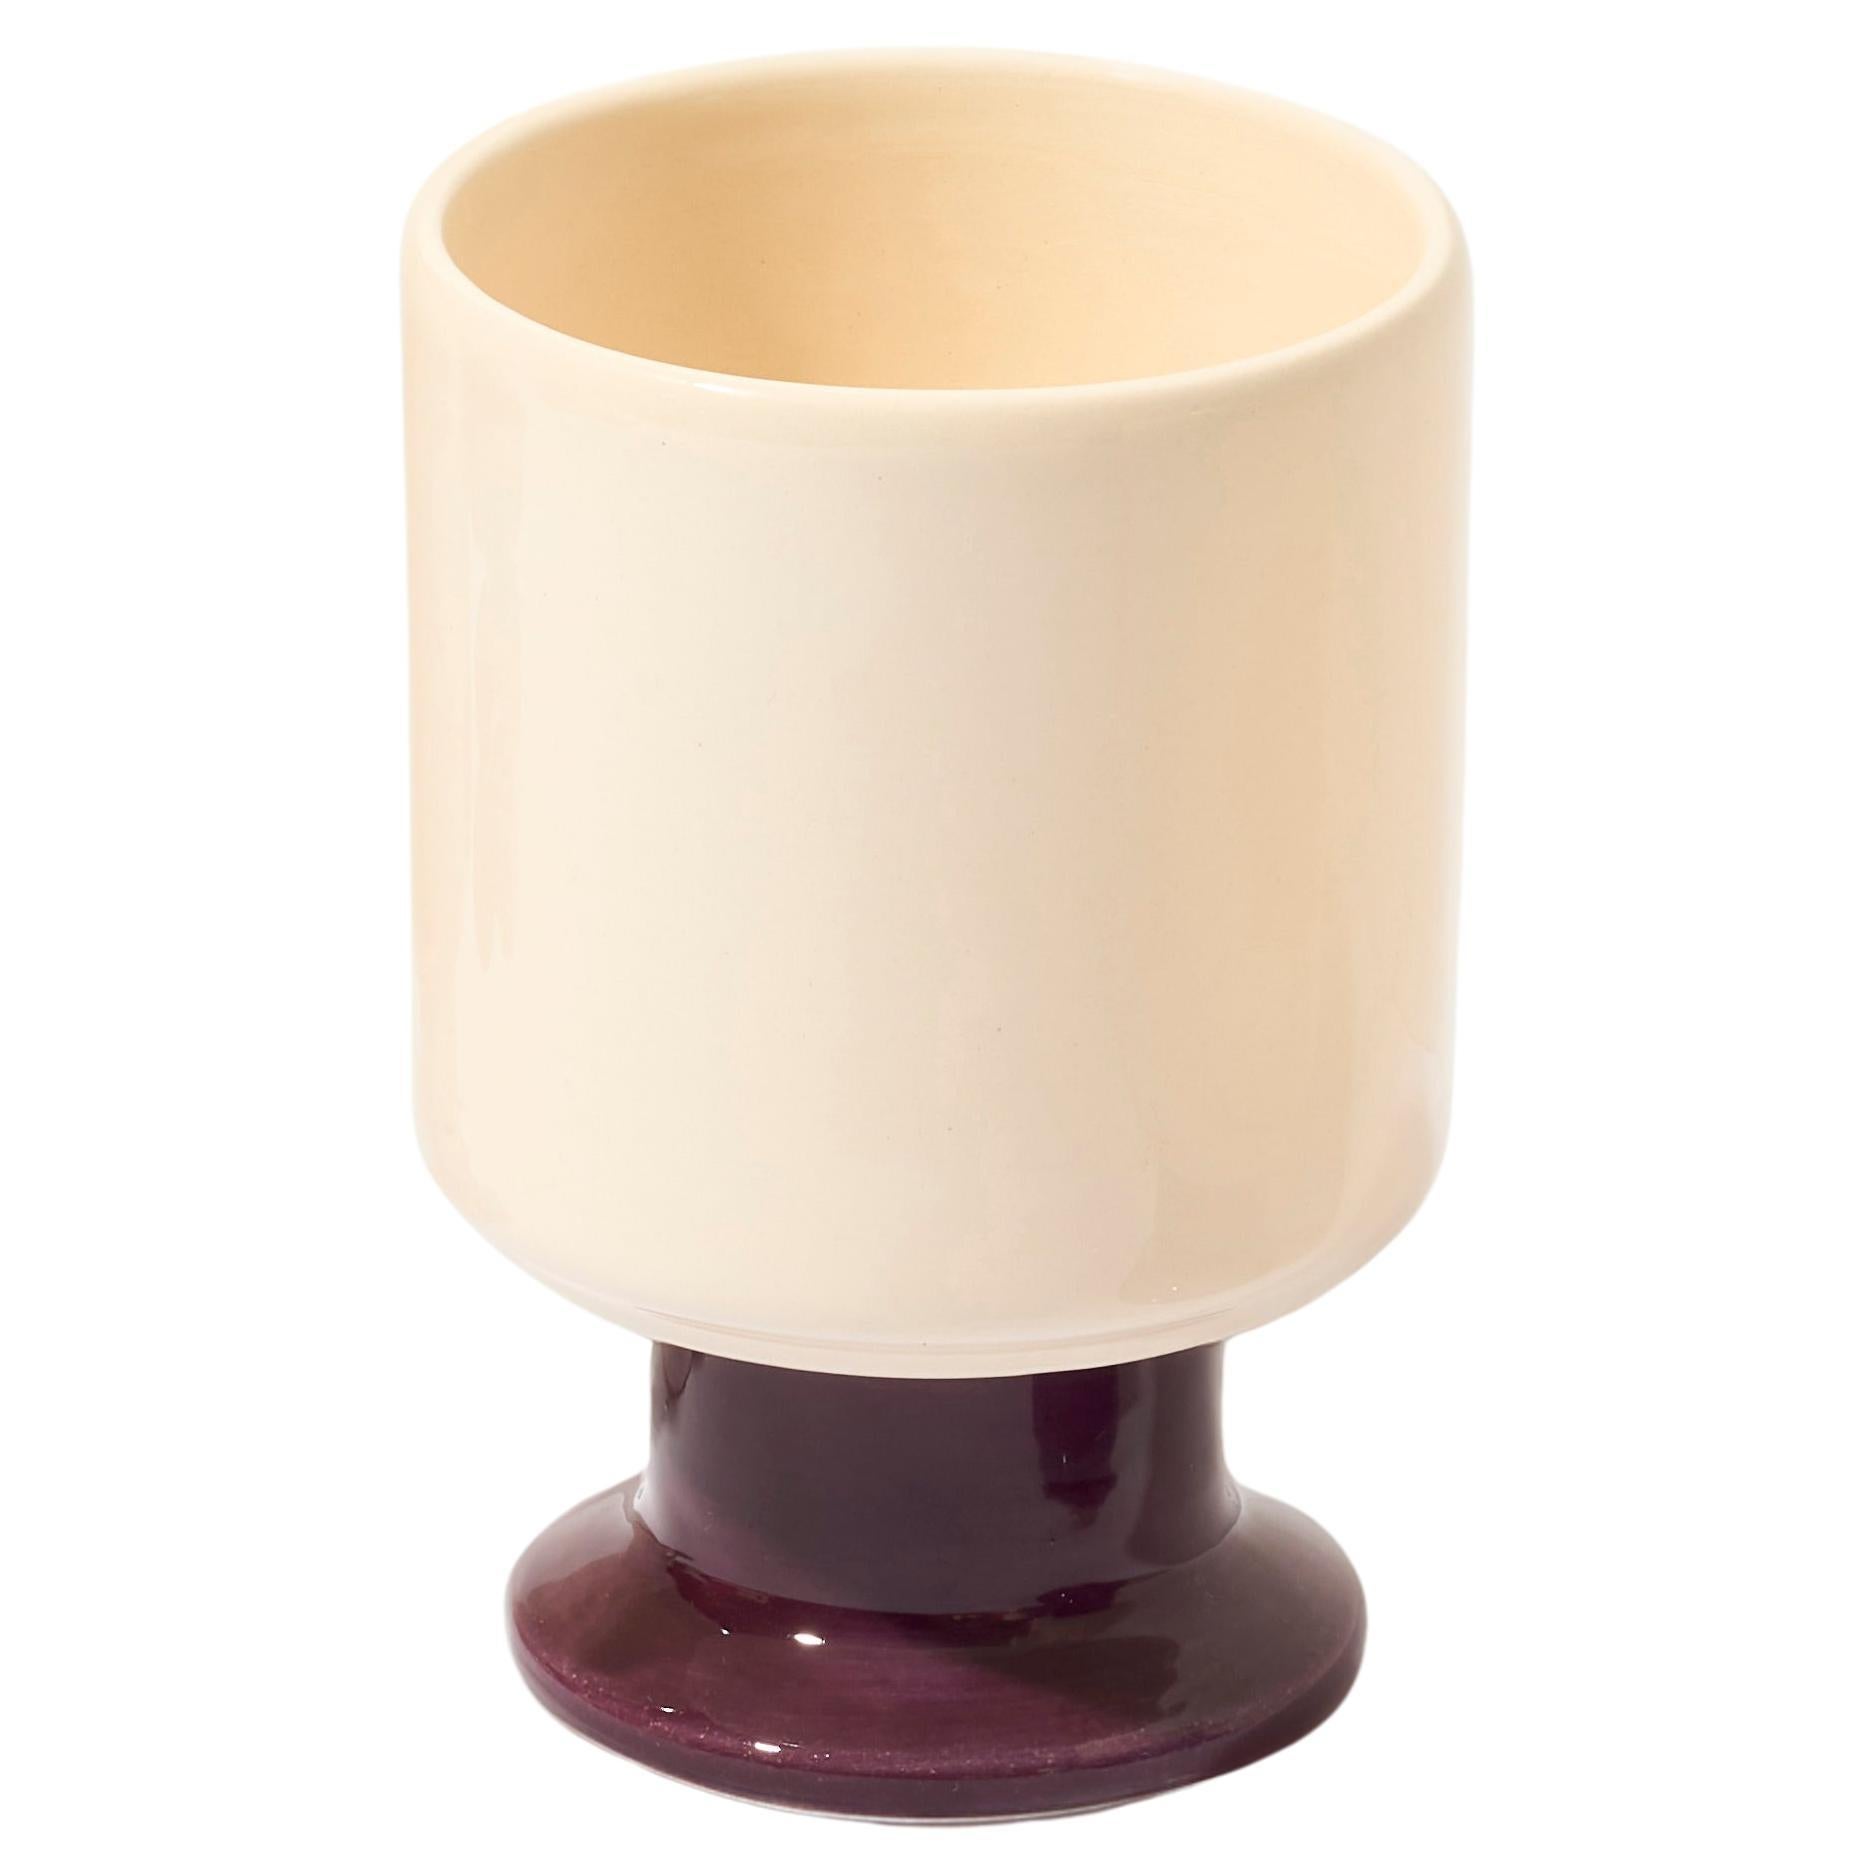 WIT mug / set of 2.

The WIT cup is a multifunctional vessel with a playful stem. It can become your favorite coffee cup, a dessert bowl, a container for pens, or other favorite accessories. WIT chalices can be stacked to create stable towers,